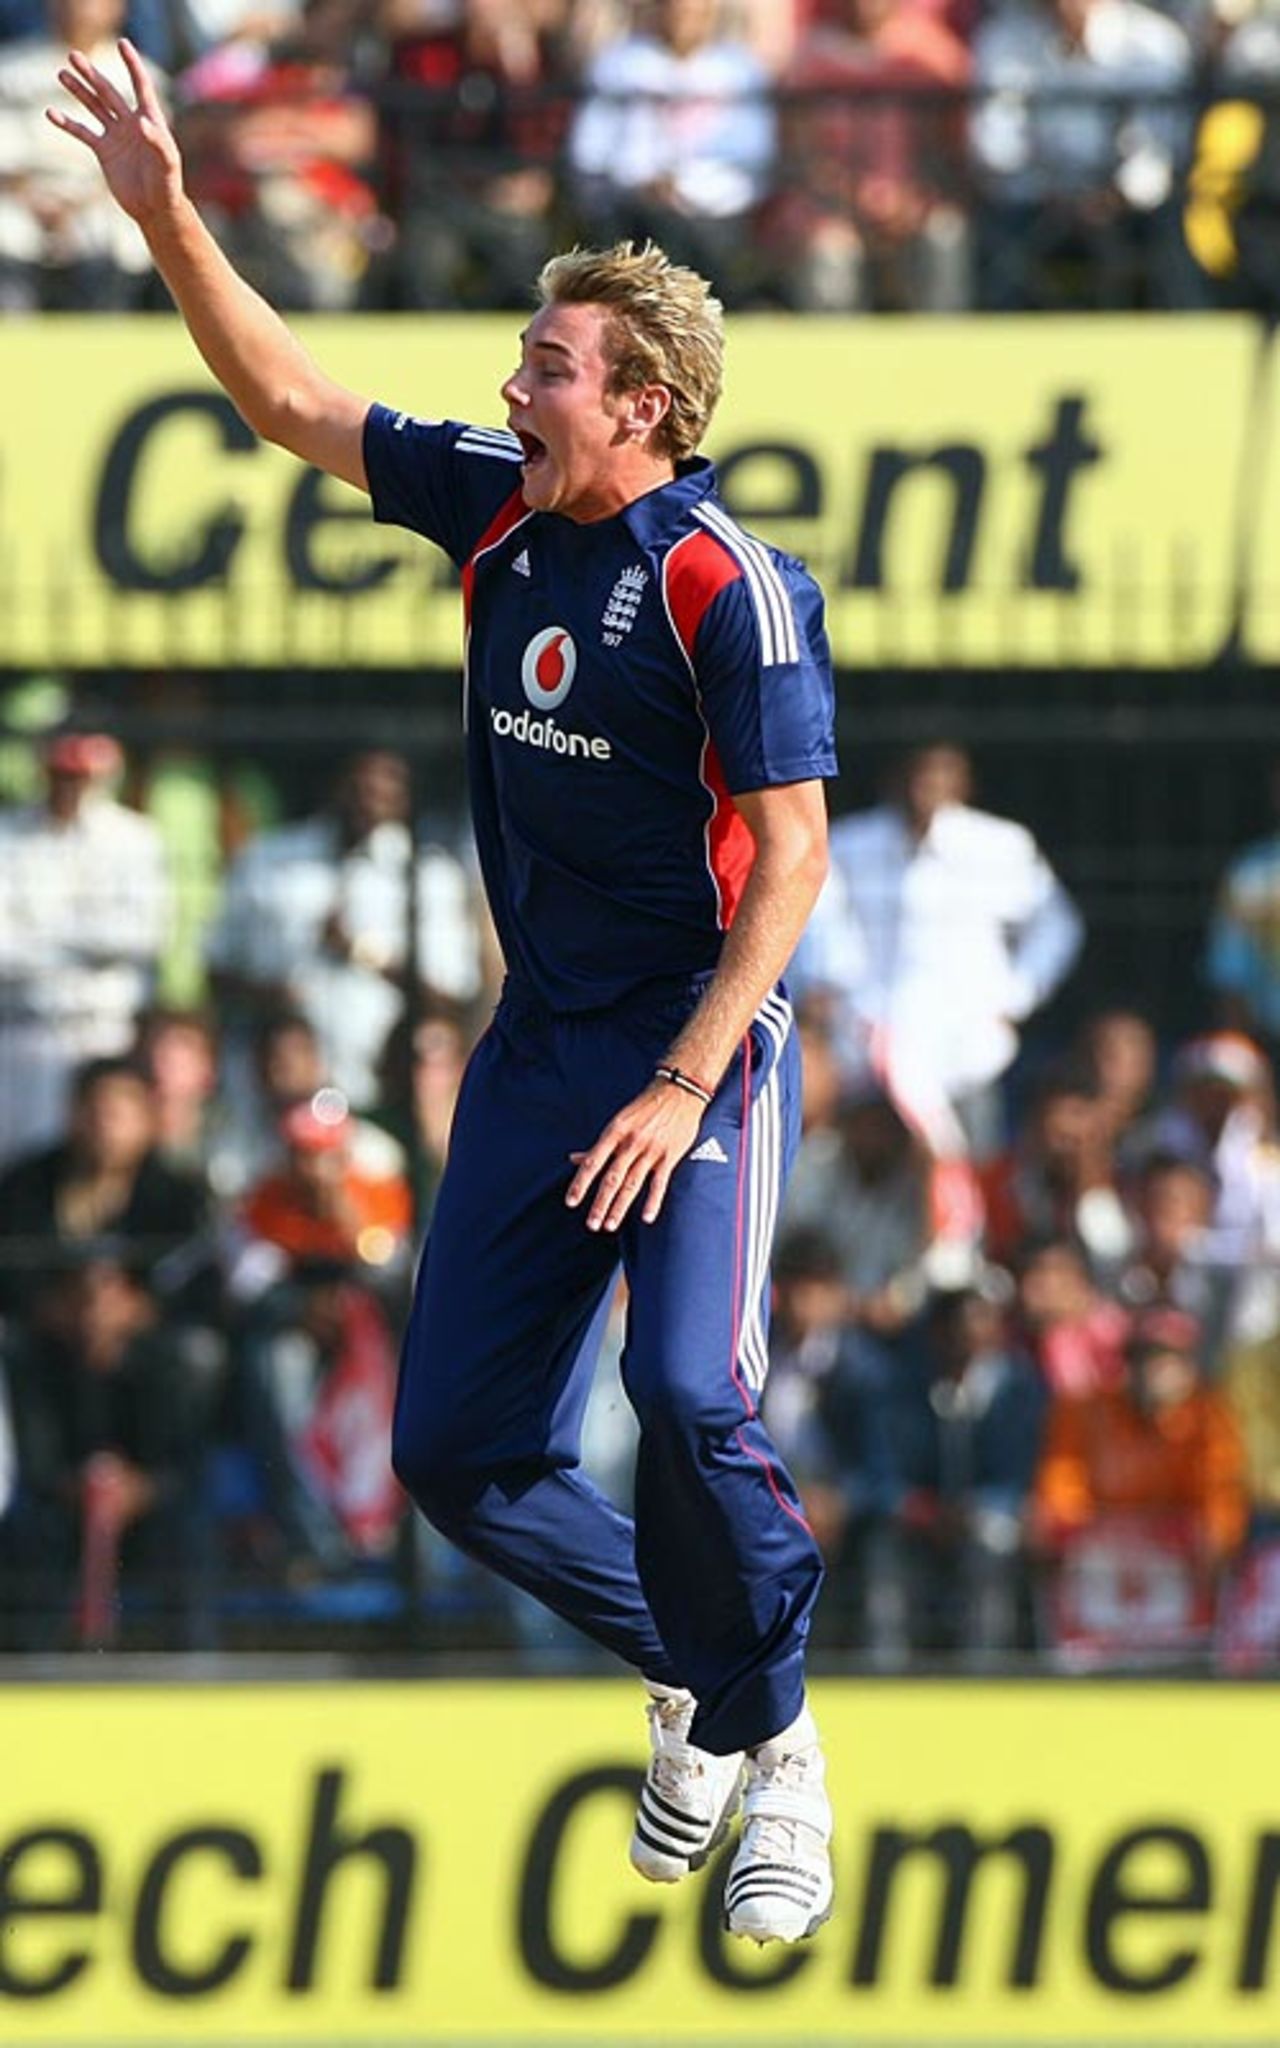 Stuart Broad is delighted after getting Rohit Sharma's wicket, India v England, 2nd ODI, Indore, November 17, 2008